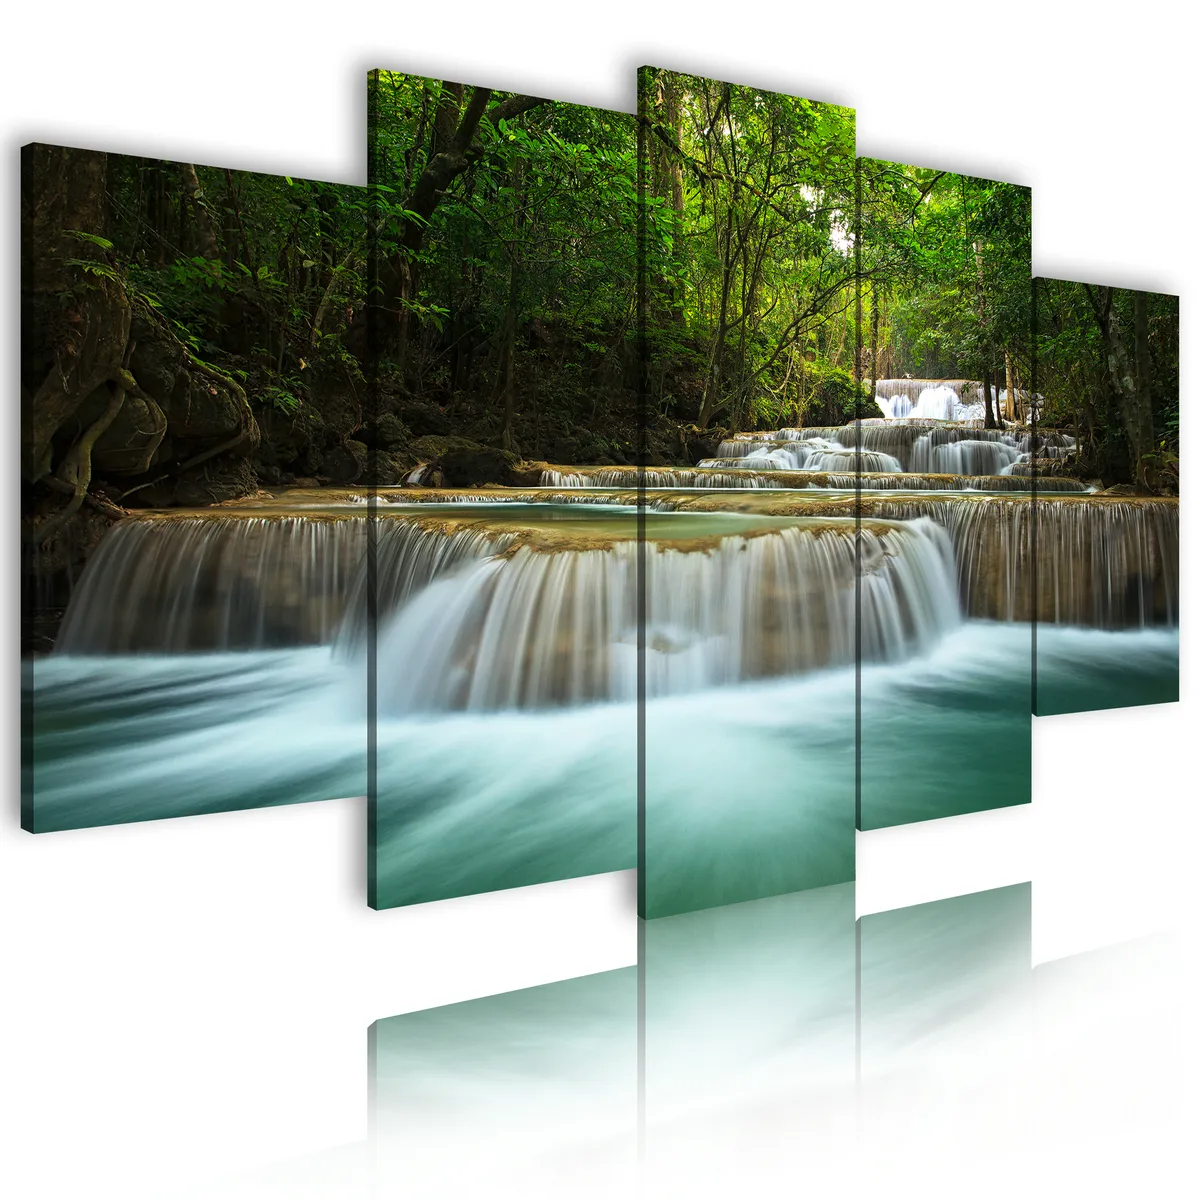 Decoration Wall Art Craft Landscape Prints Abstract Home Modern Paintings 5 Piece Oil Decorative Waterfall Canvas Painting